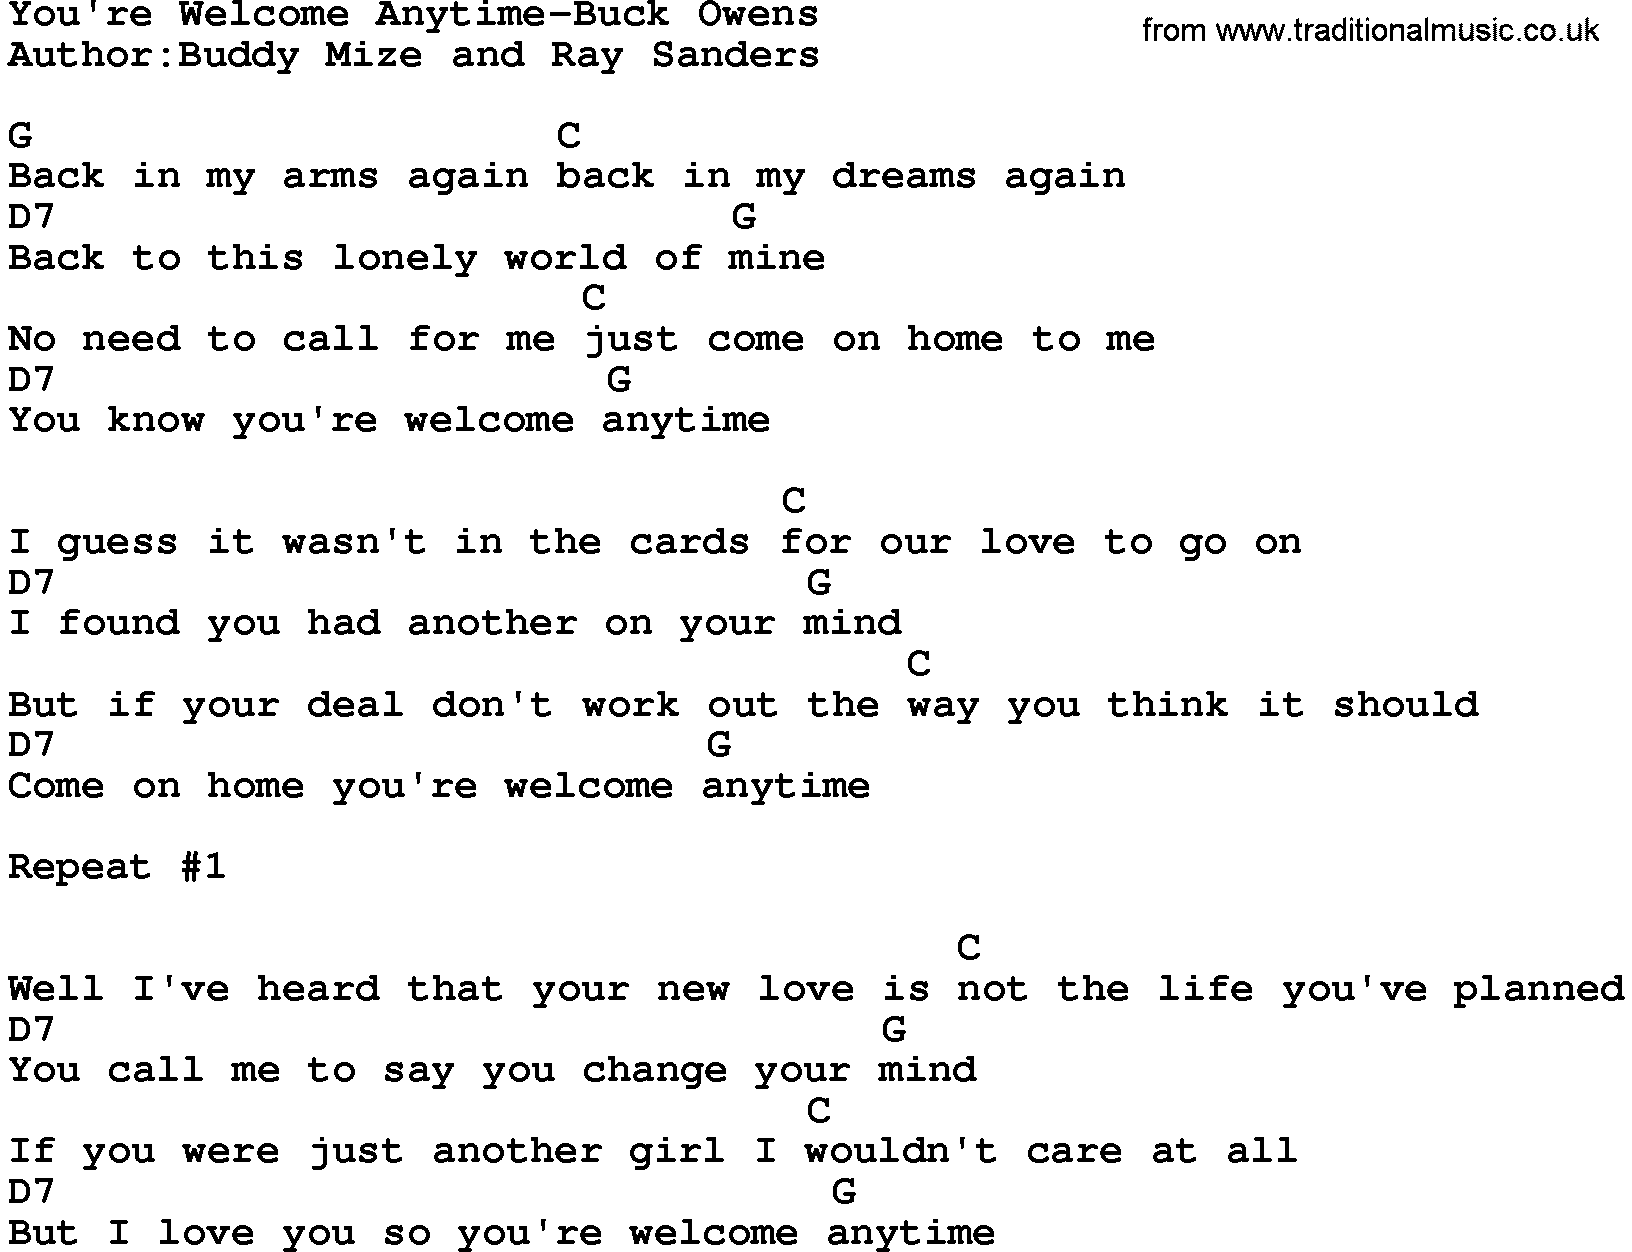 Country music song: You're Welcome Anytime-Buck Owens lyrics and chords